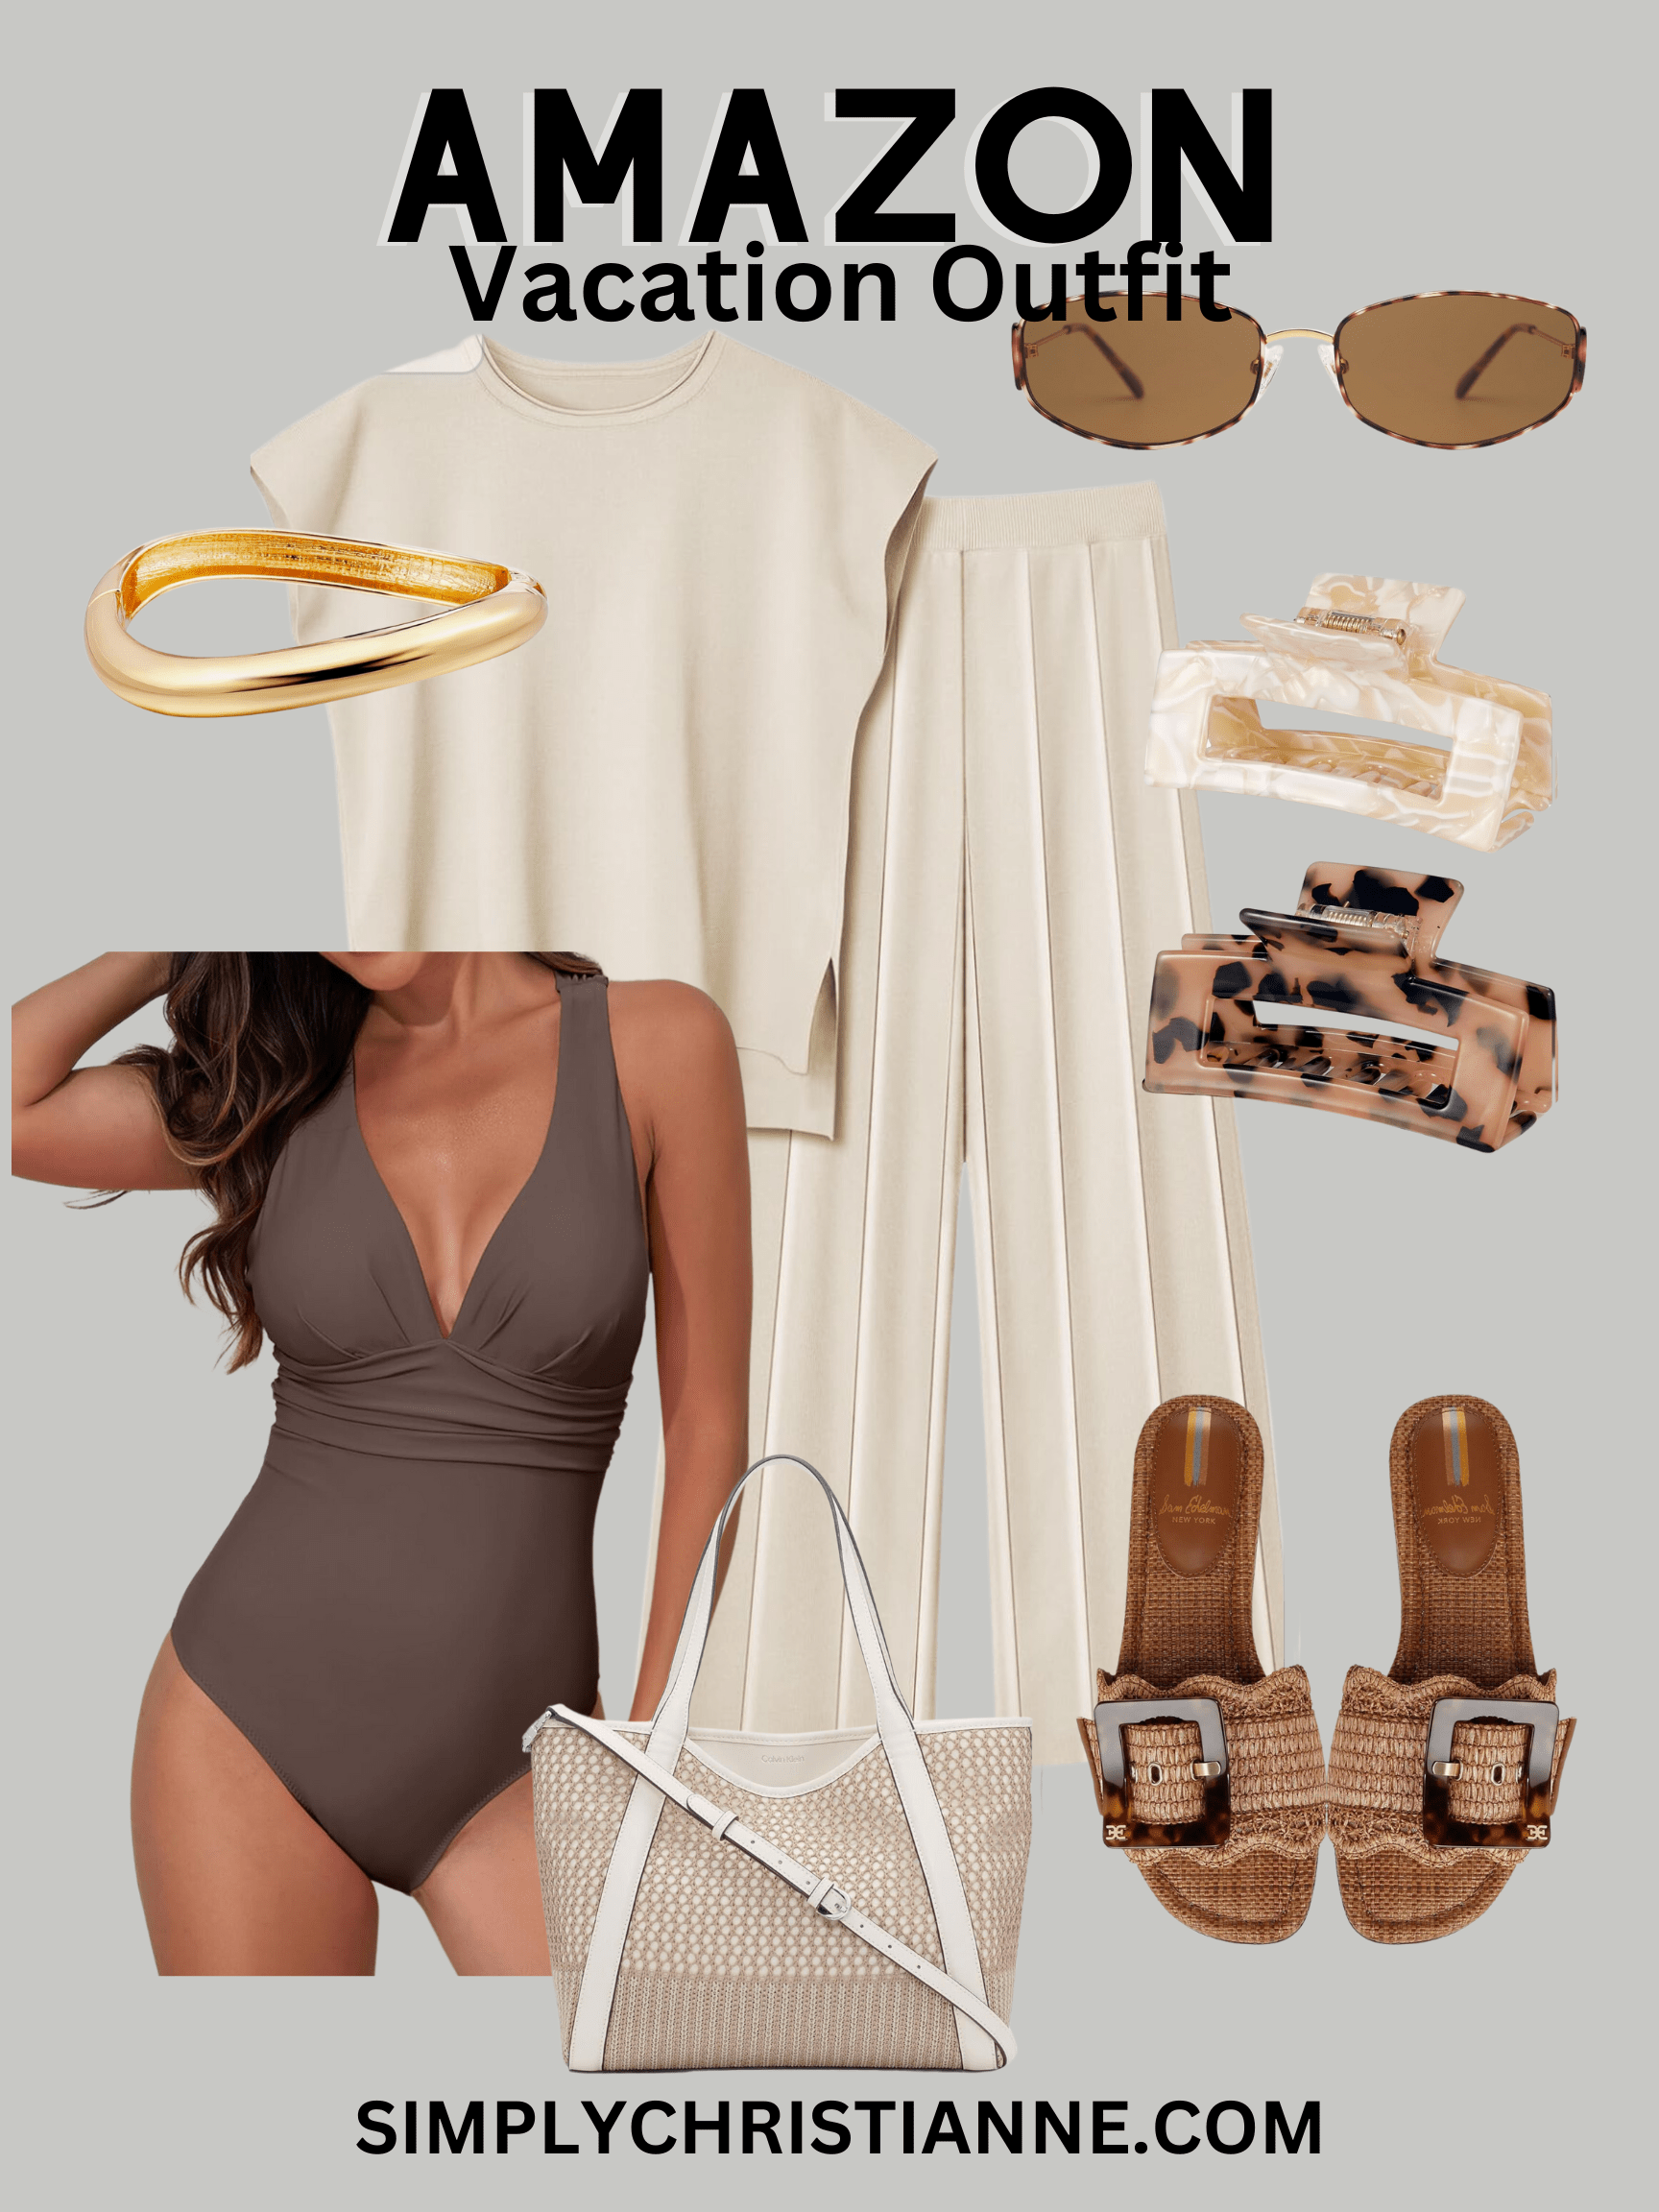 Amazon Vacation Outfit Ideas 